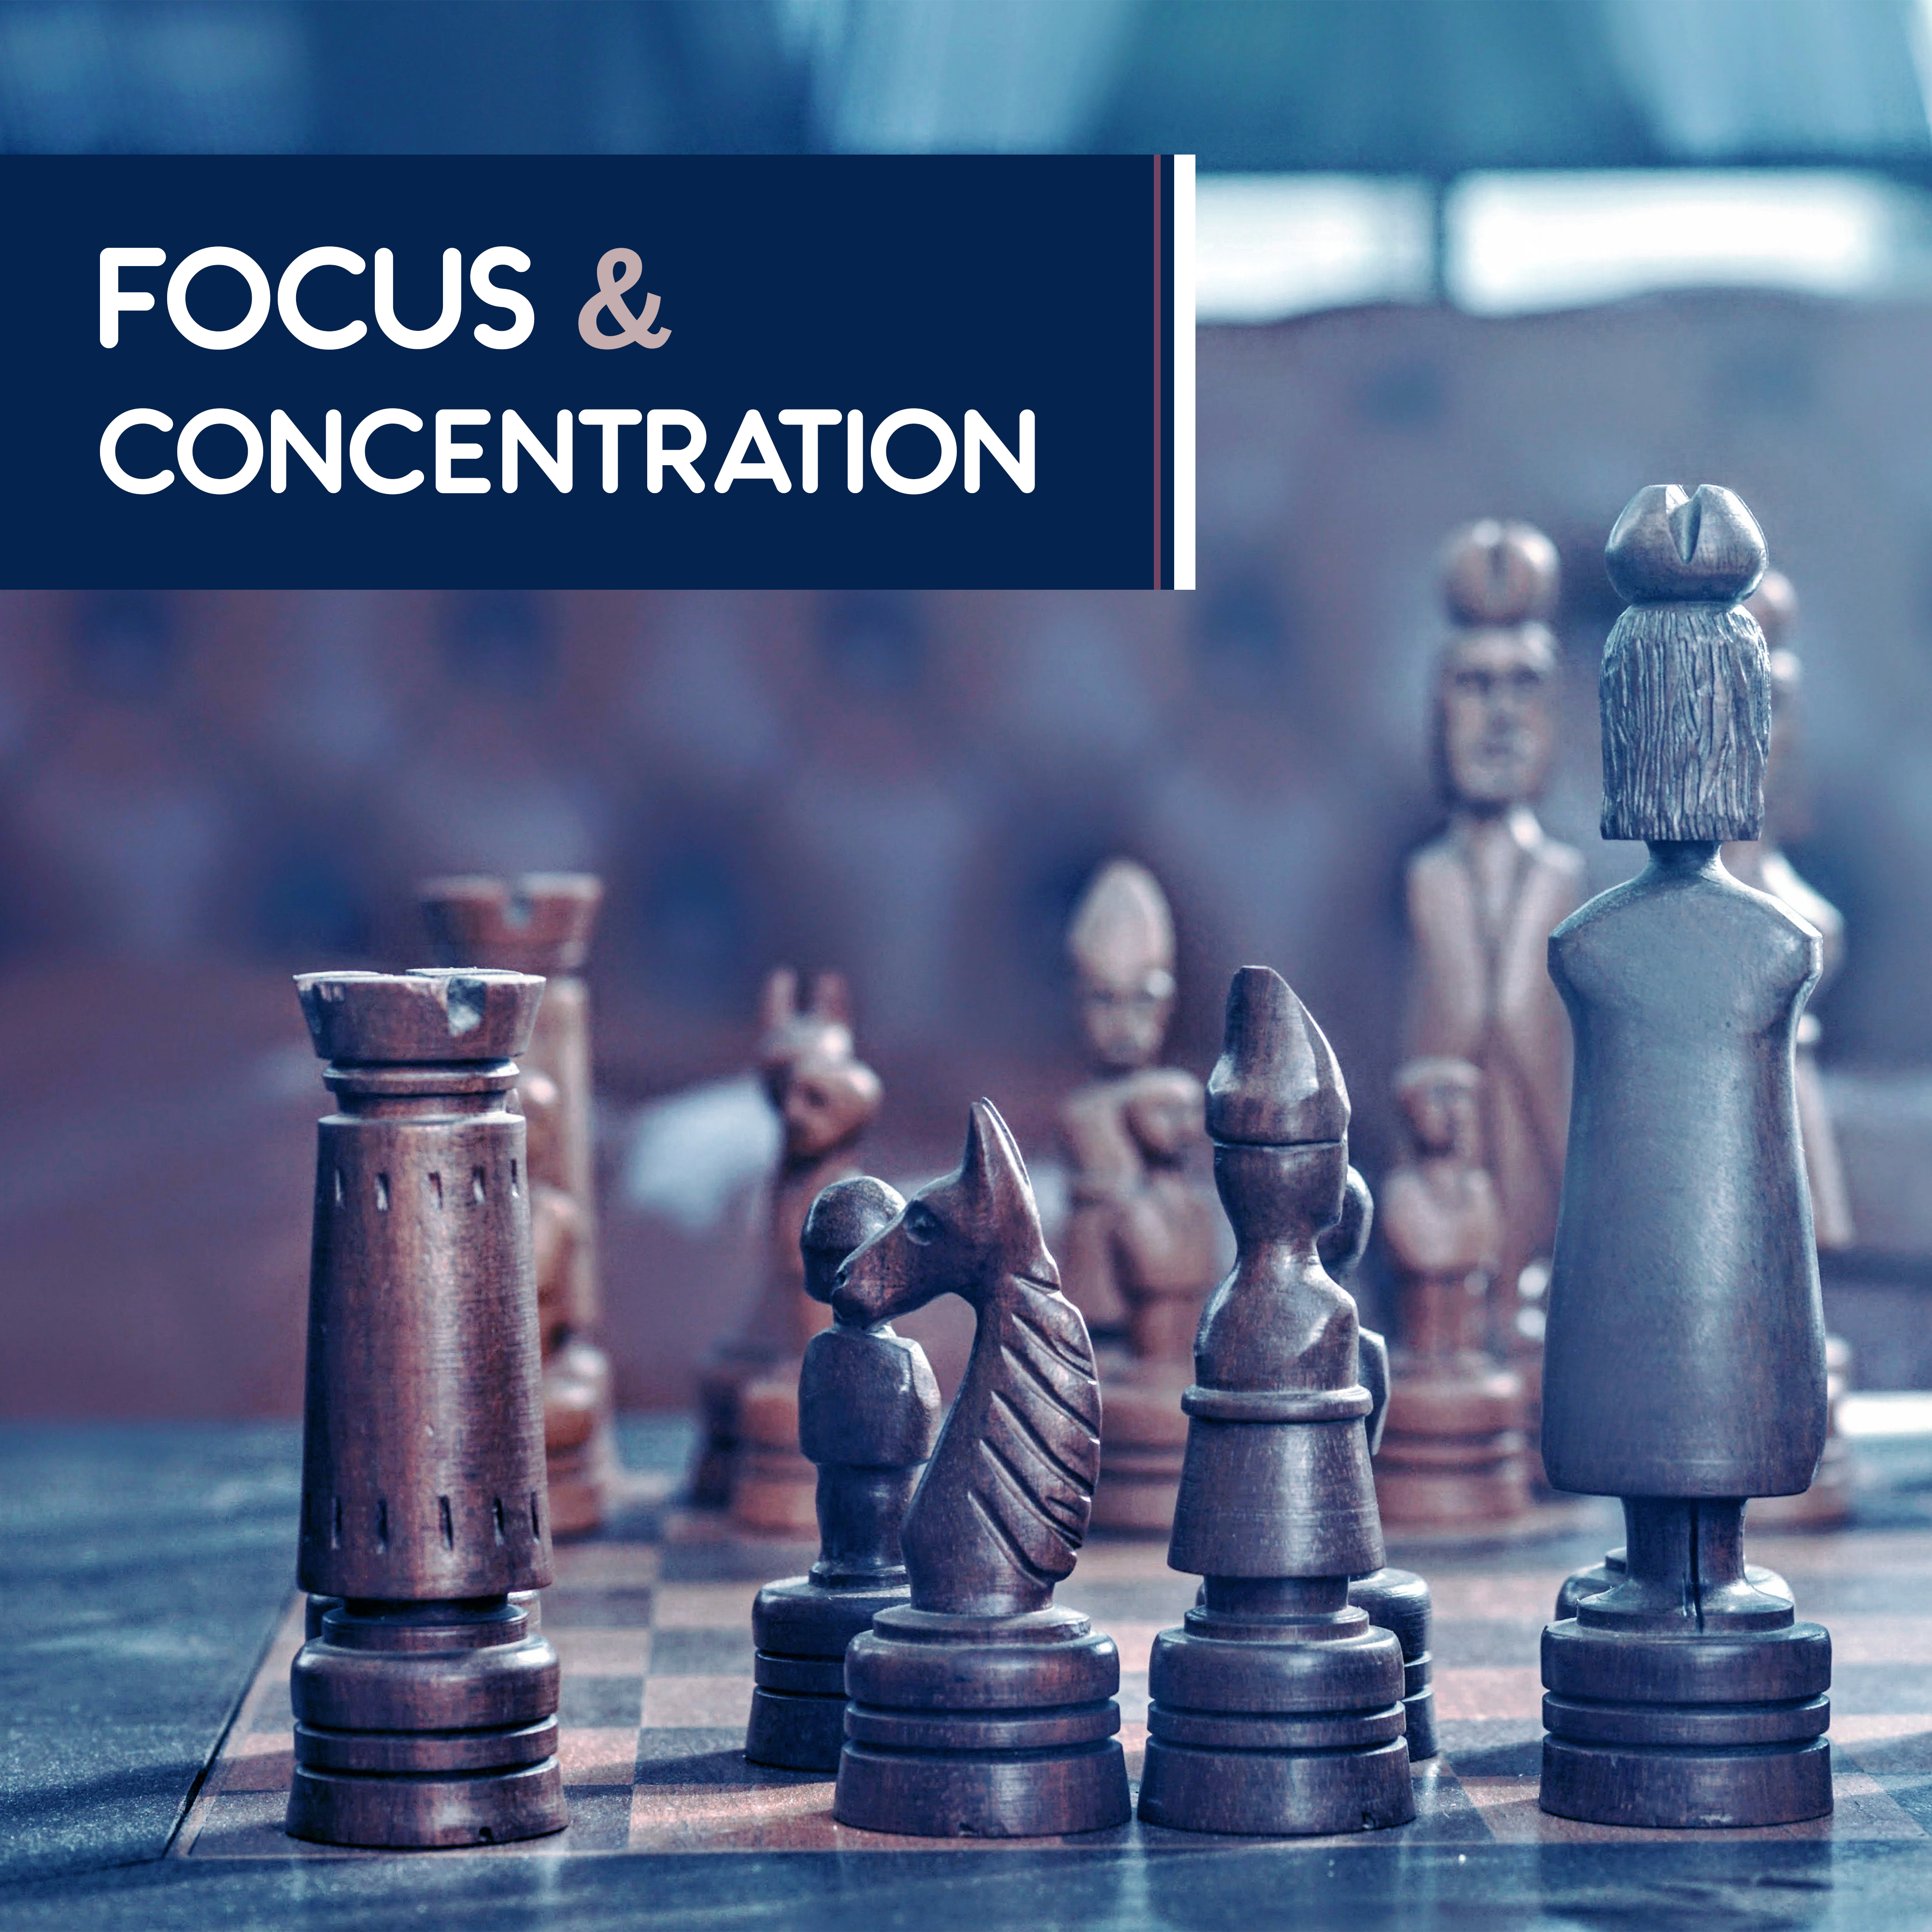 Focus & Concentration – Studying Music, Sounds Relieve Stress, Easier Learning, Mozart, Beethoven, Brain Power